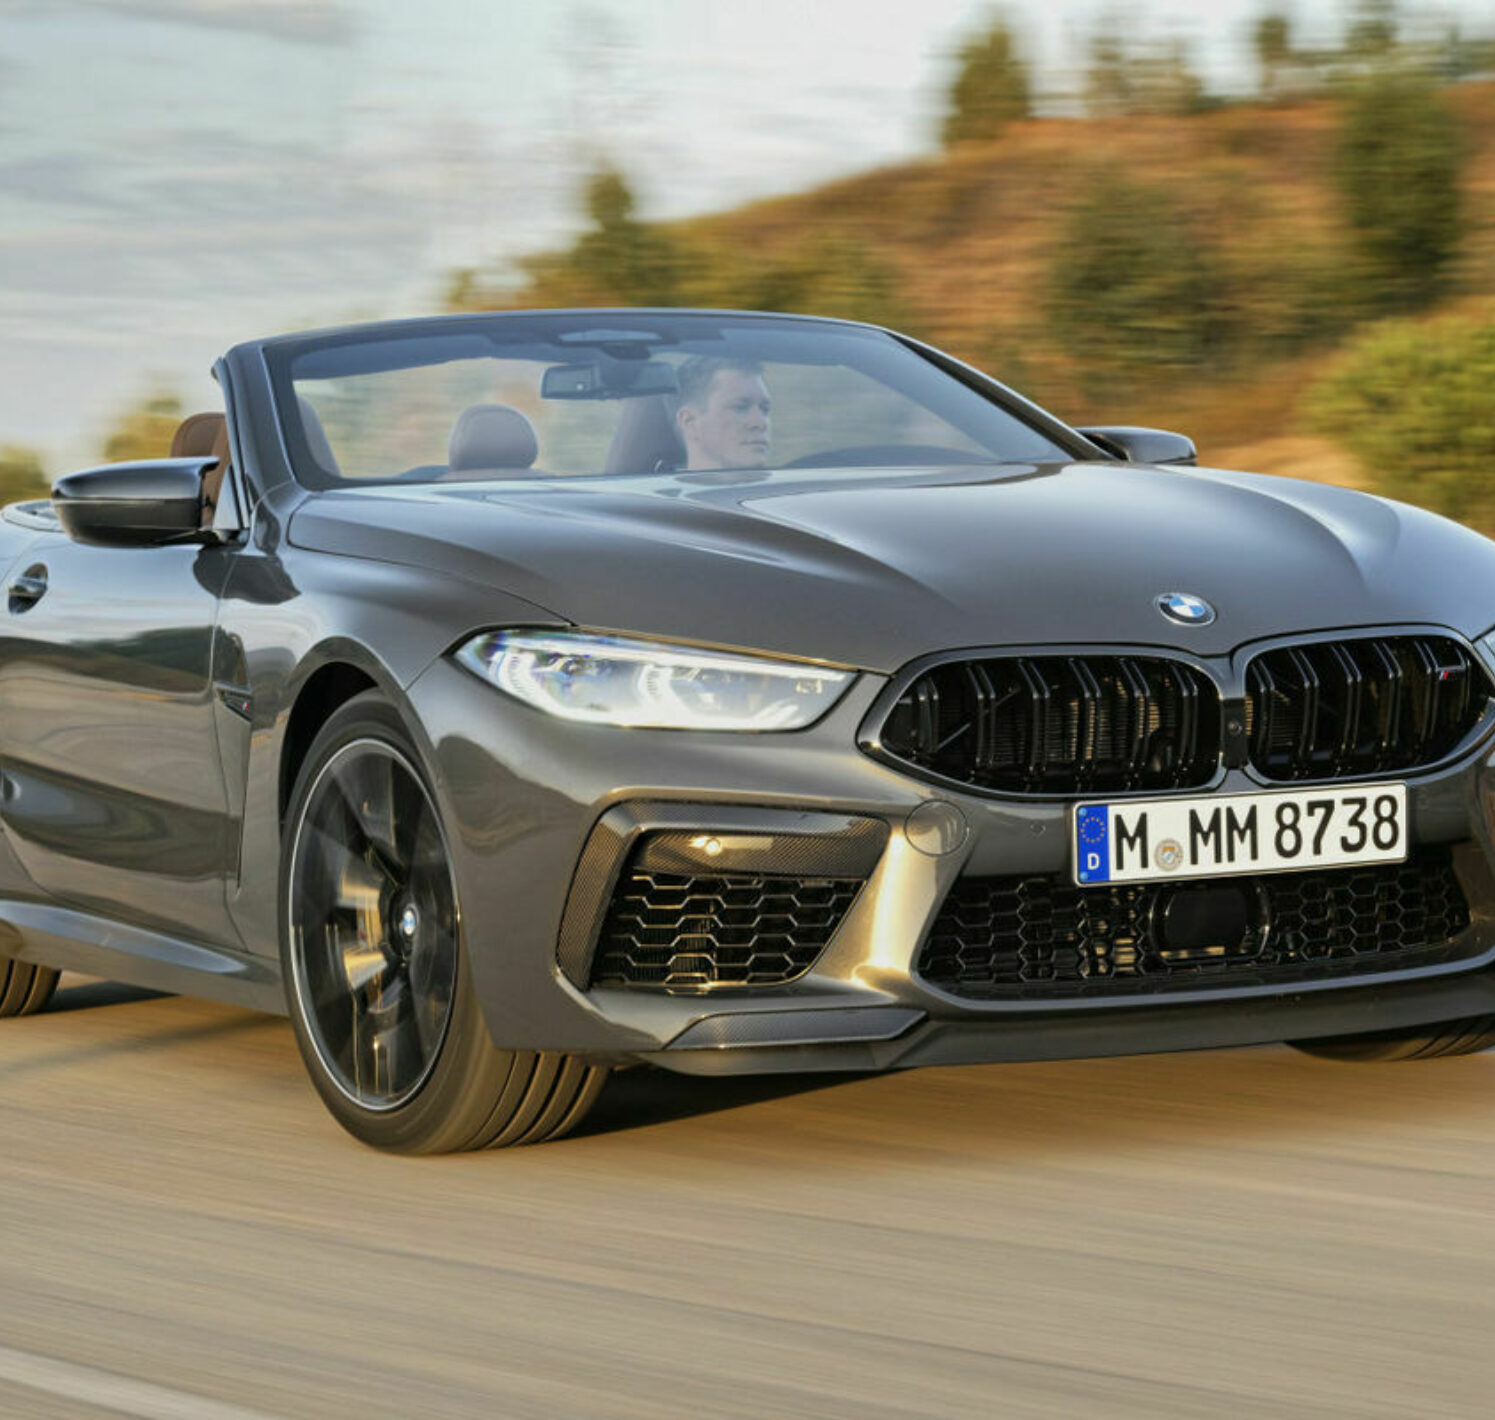 https://autofilter.sk/assets/images/m8-coupe/gallery/p90368324-high-res-the-new-bmw-m8-compe-galeria.jpg - obrazok